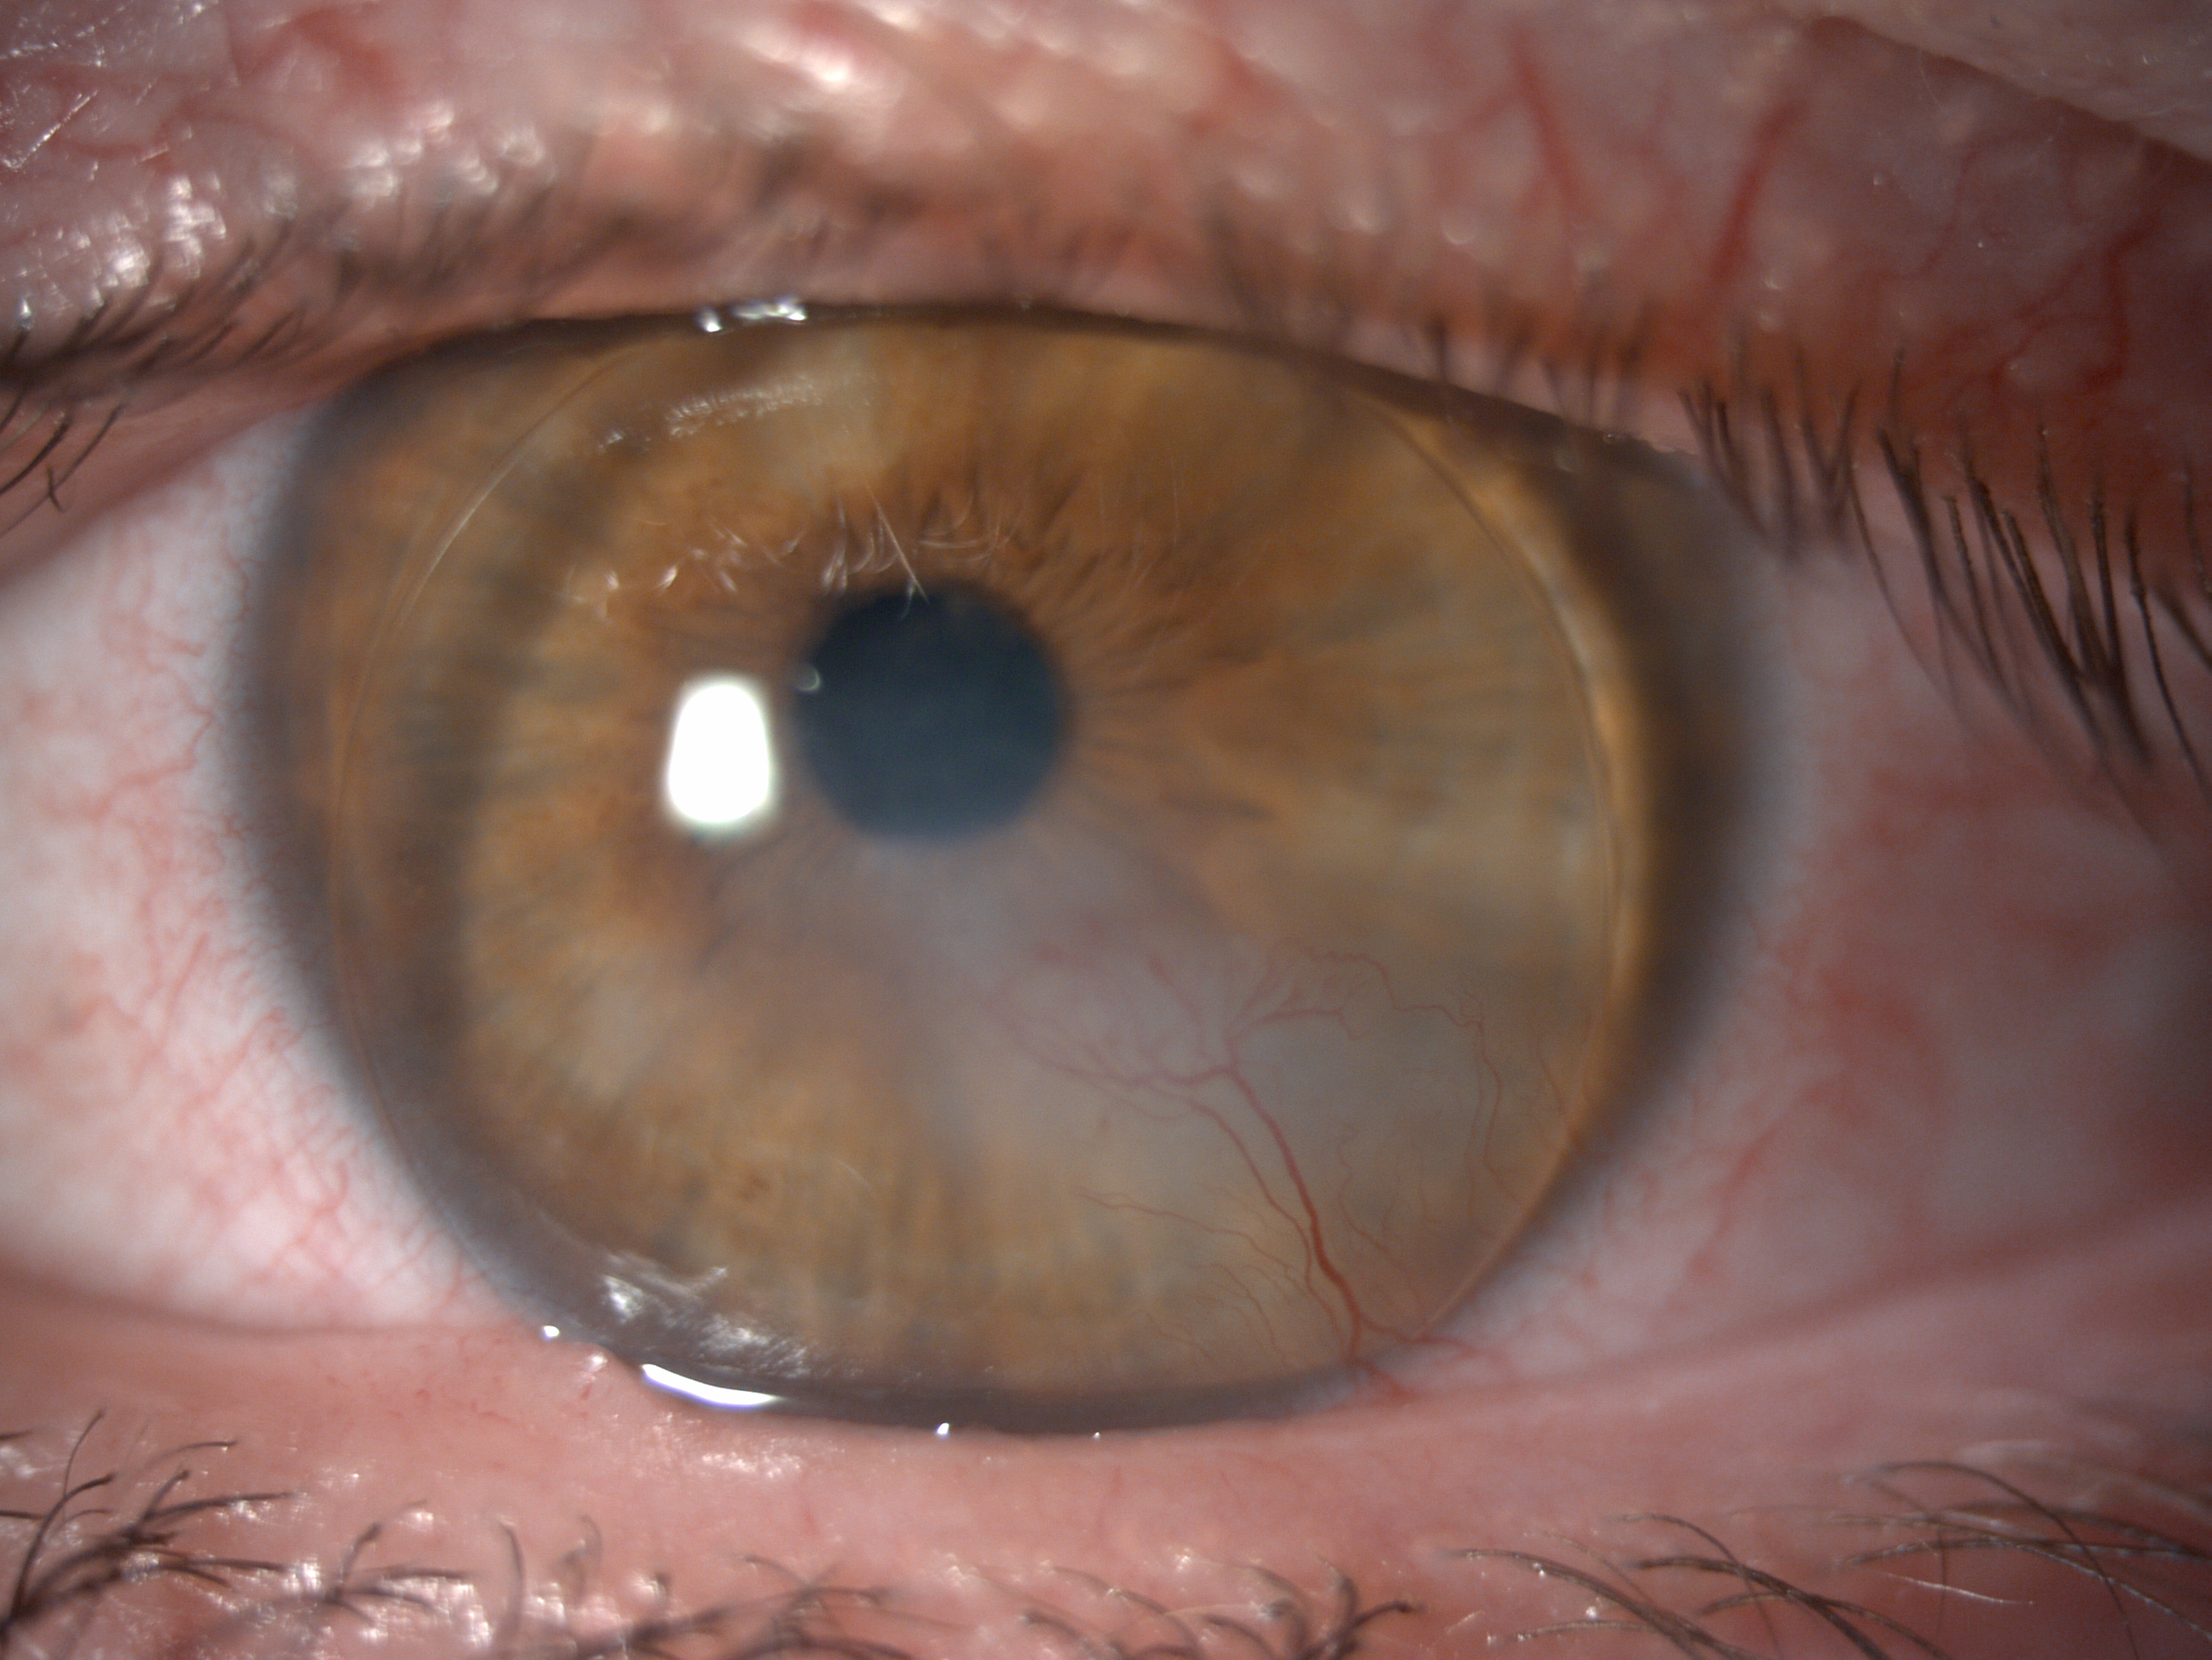 GP Lens on Eye with Corneal Scarring and Neovascularization